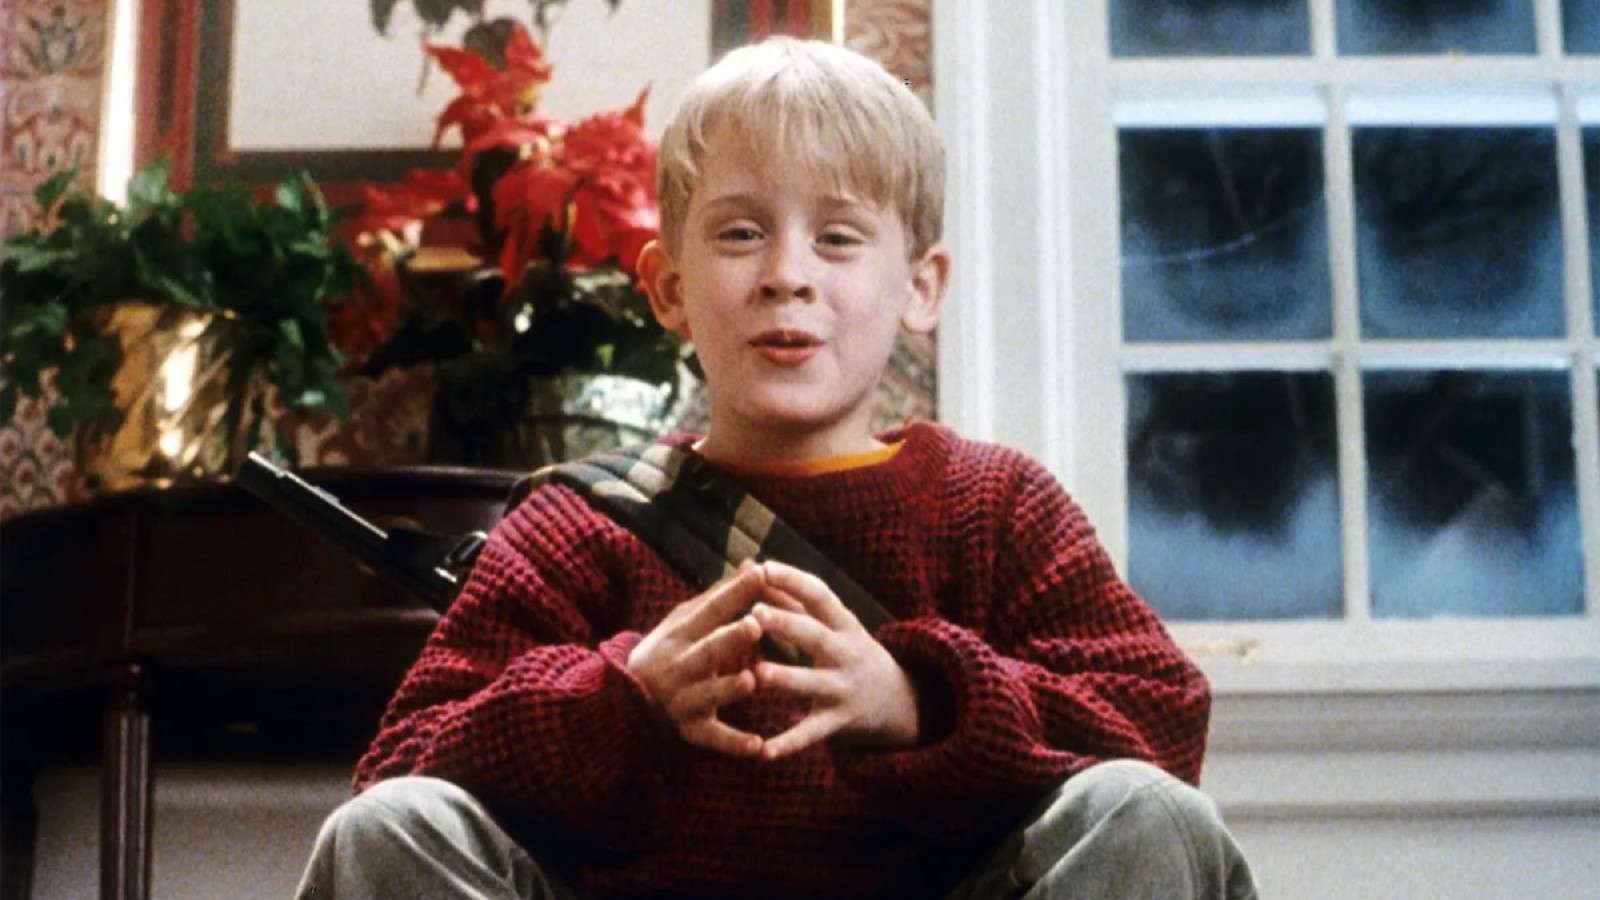 Kevin sitting at the top of his stairs in Home Alone.